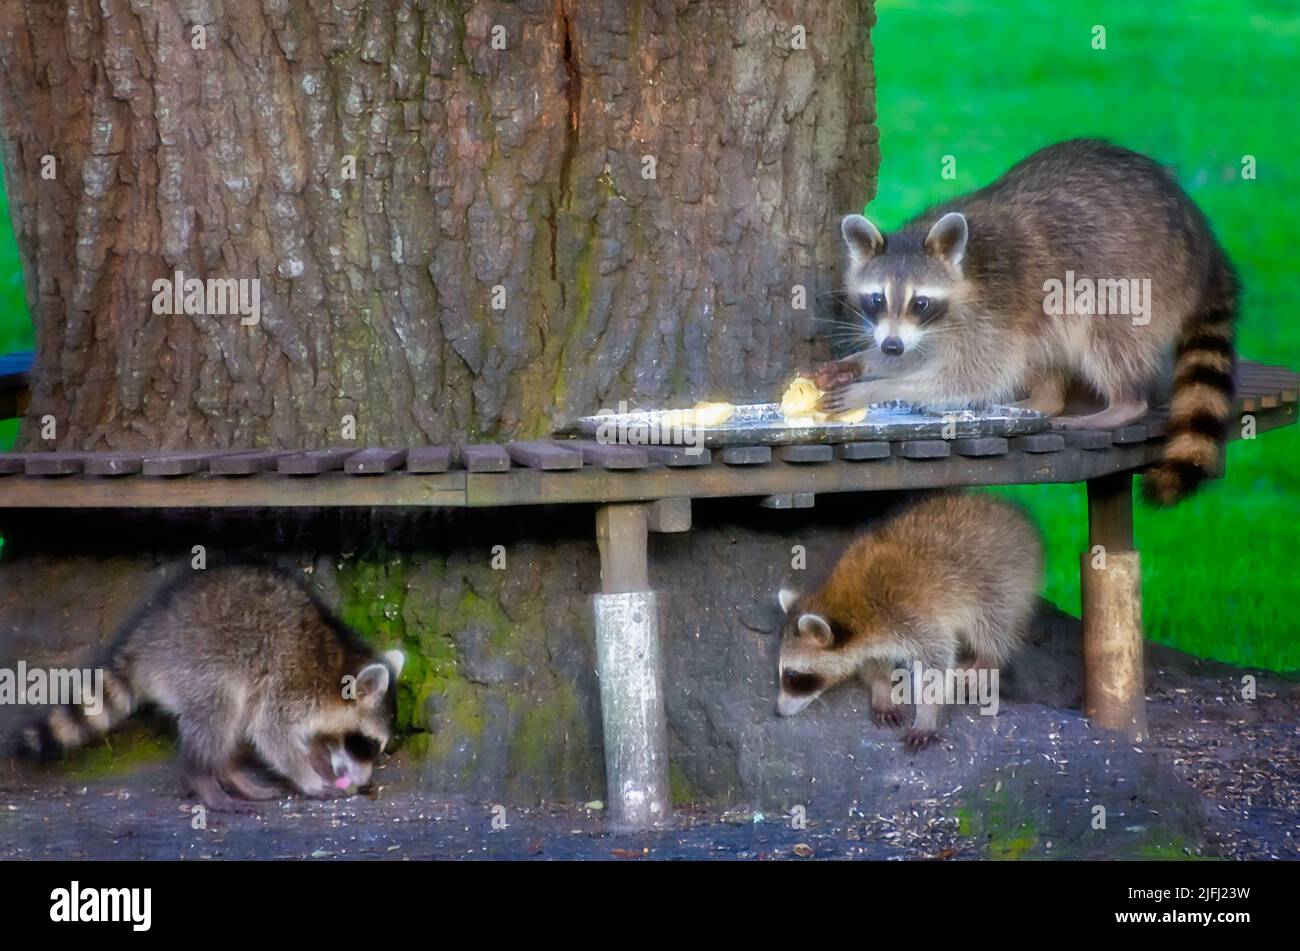 A mother raccoon and her babies eat bananas at a backyard wildlife feeding station, July 13, 2021, in Coden, Alabama. Stock Photo